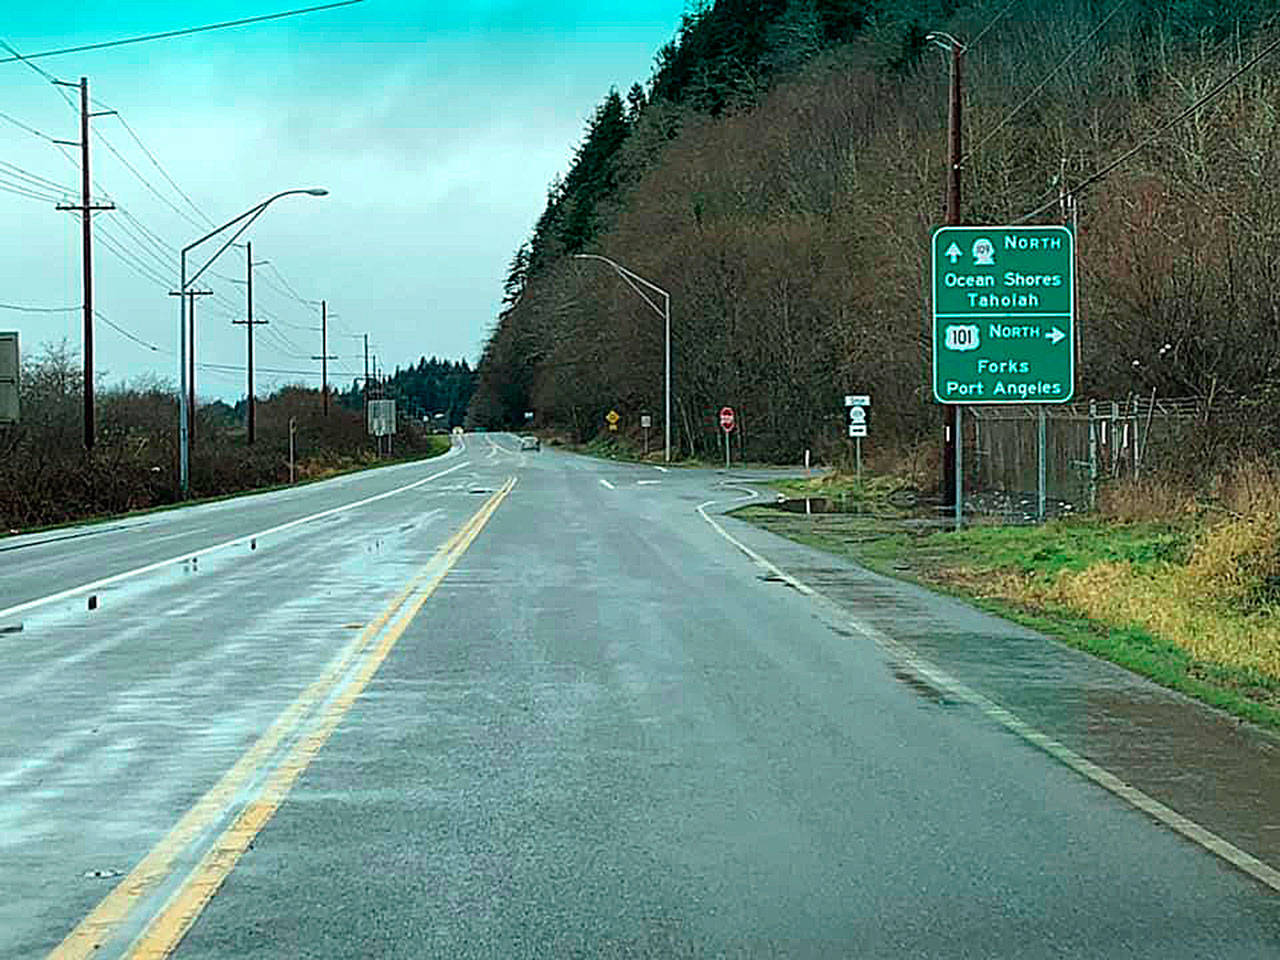 COURTESY HOQUIAM POLICE DEPARTMENT 
A welcome sign, so to speak, greeted drivers on State Route 109 Tuesday afternoon - the road closed signs had come down as the state Department of Transportation reopened the roadway after determining no significant damage that would indicate future slope concerns at the scene of a major slide and subsequent smaller slide that closed the roadway twice over the past two weeks.